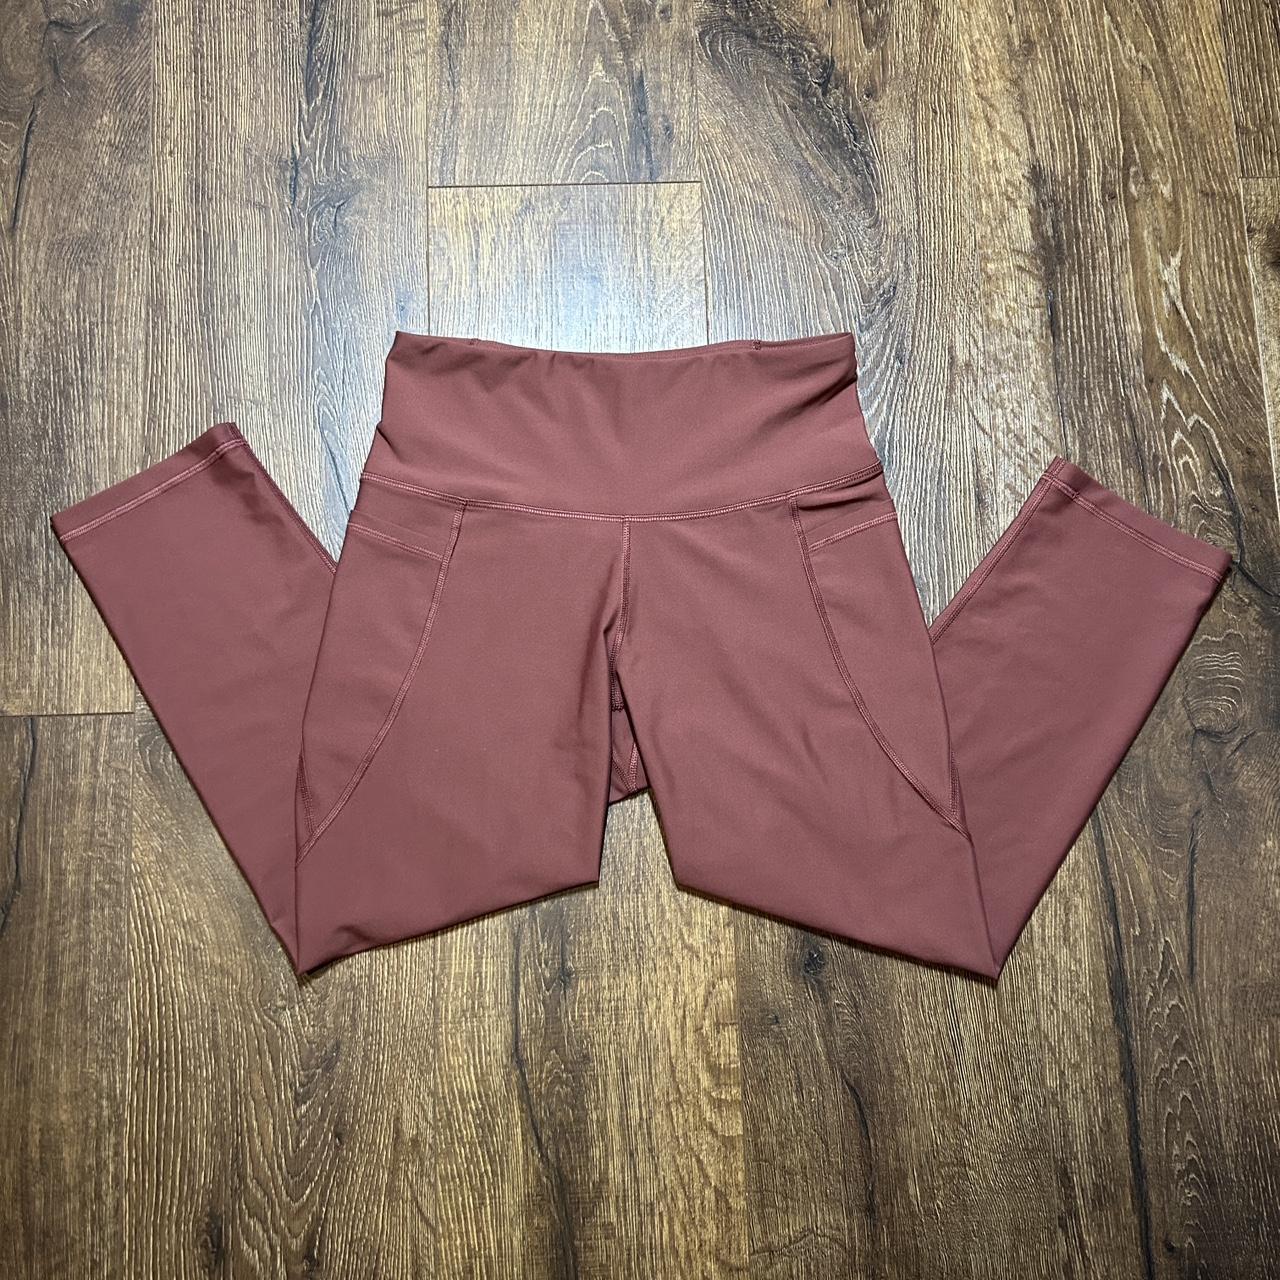 Old navy elevate leggings go dry color pink and - Depop